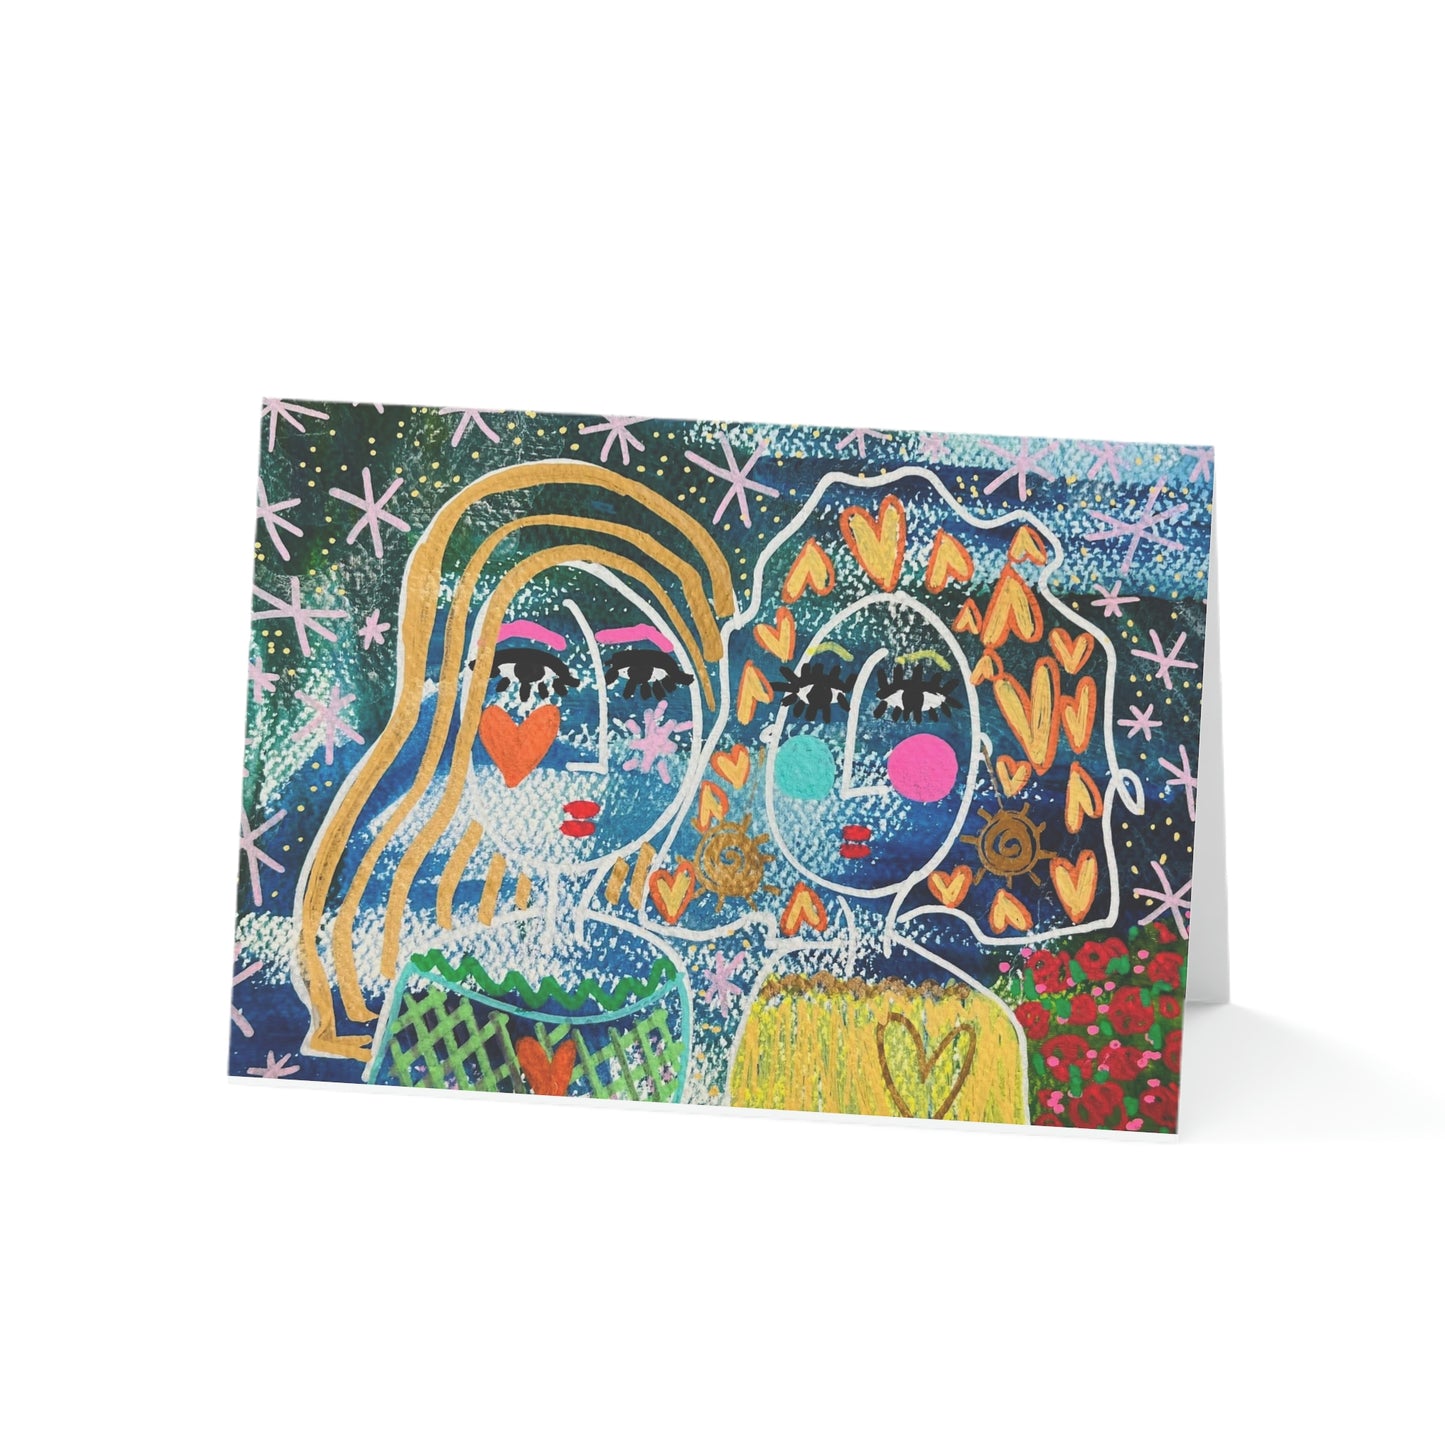 "State of Grace" Girl Talk Art Greeting Cards